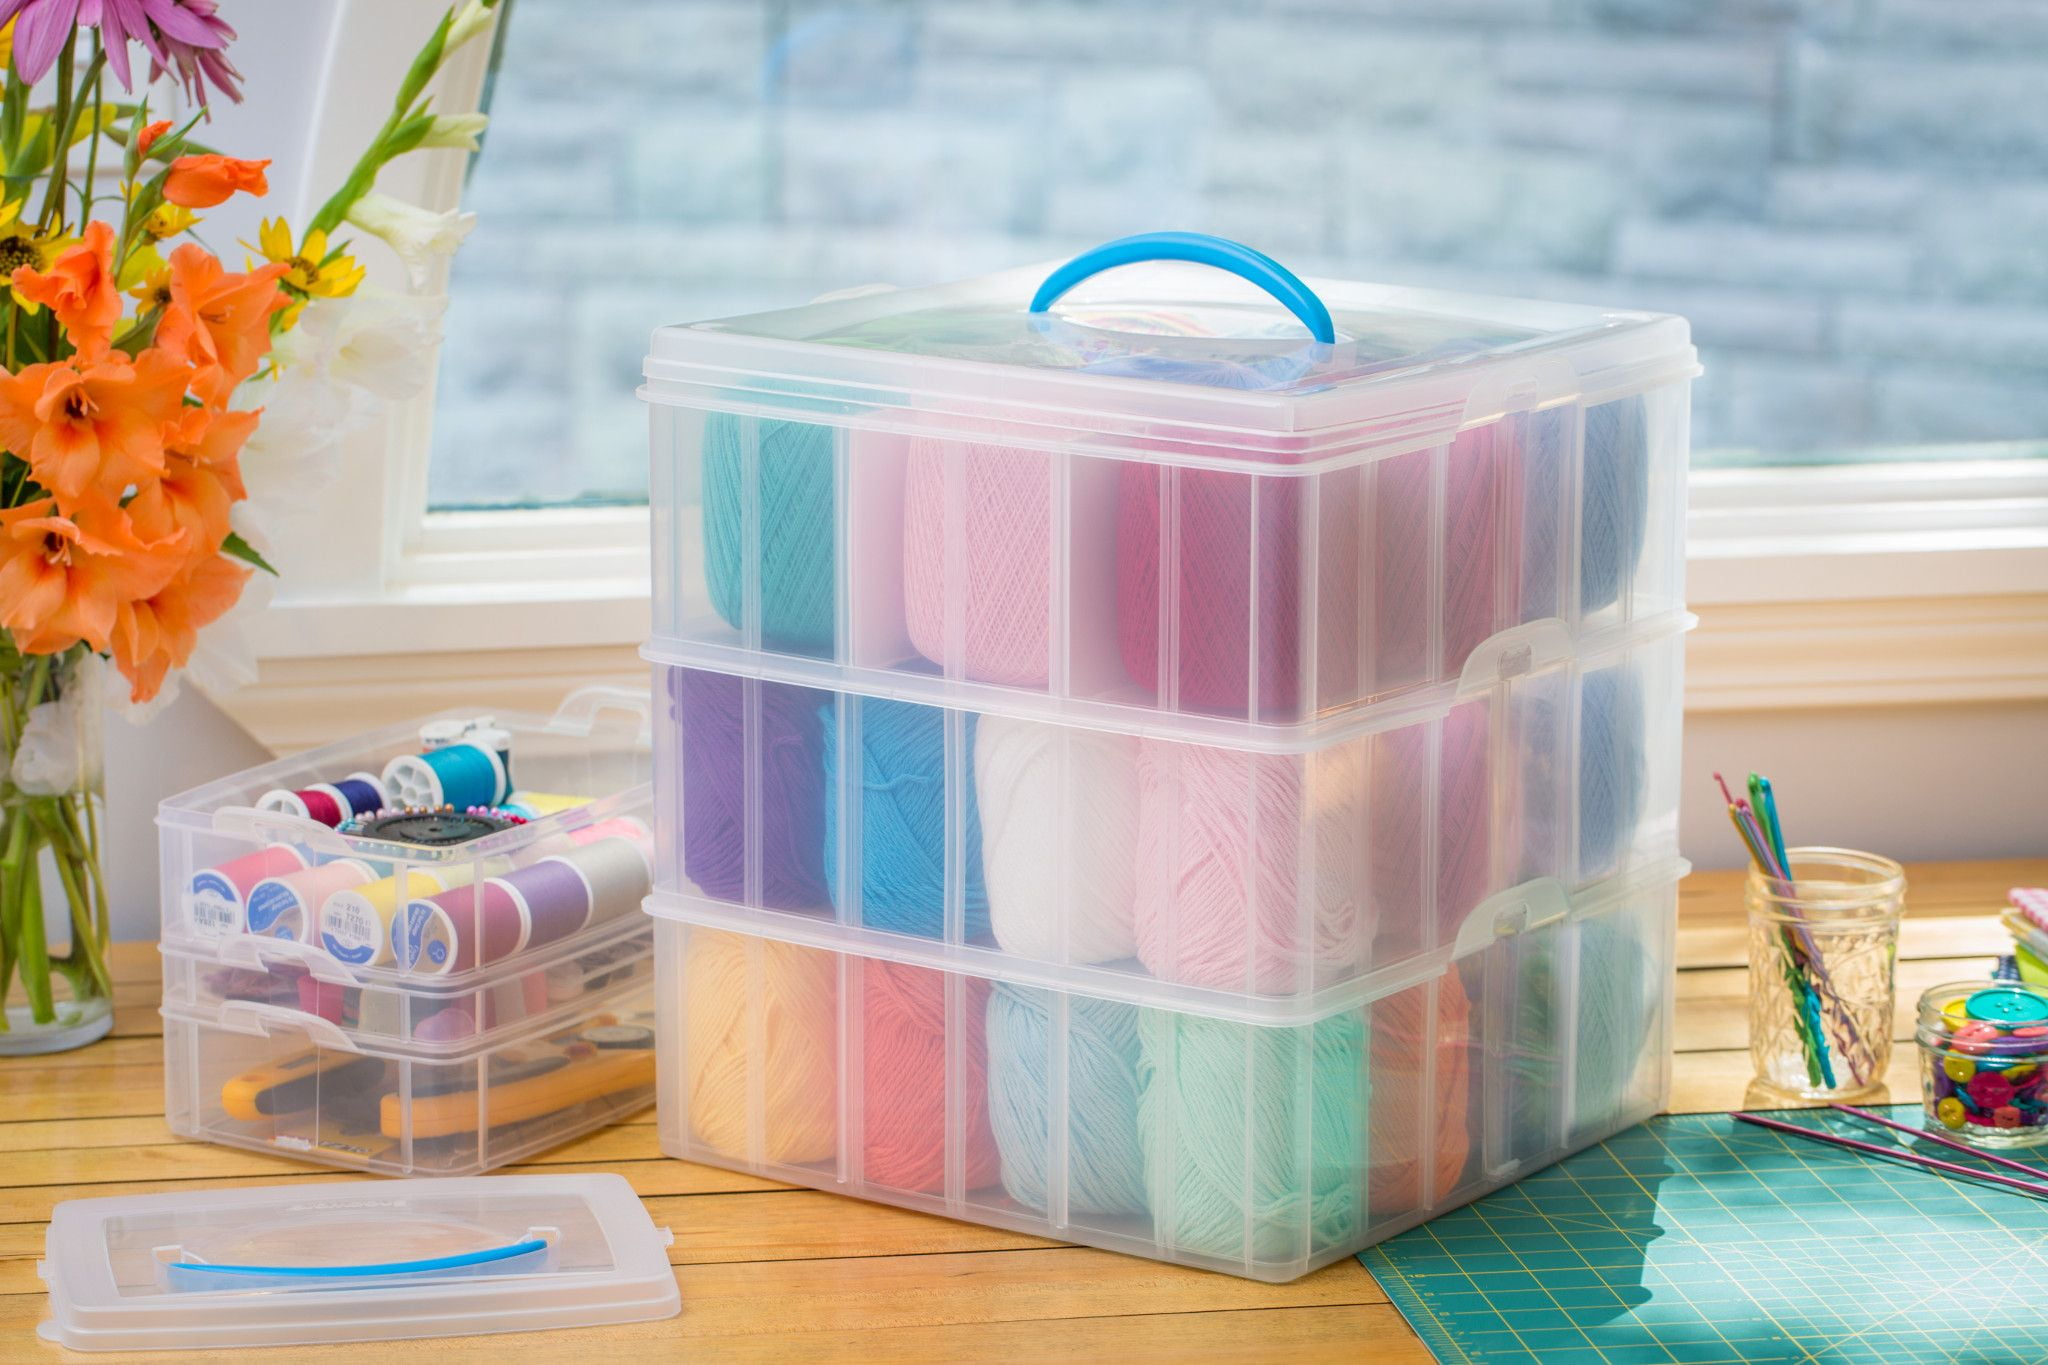 Our Snap 'N Stack 4 Layer 6x9 Storage Container is perfect for